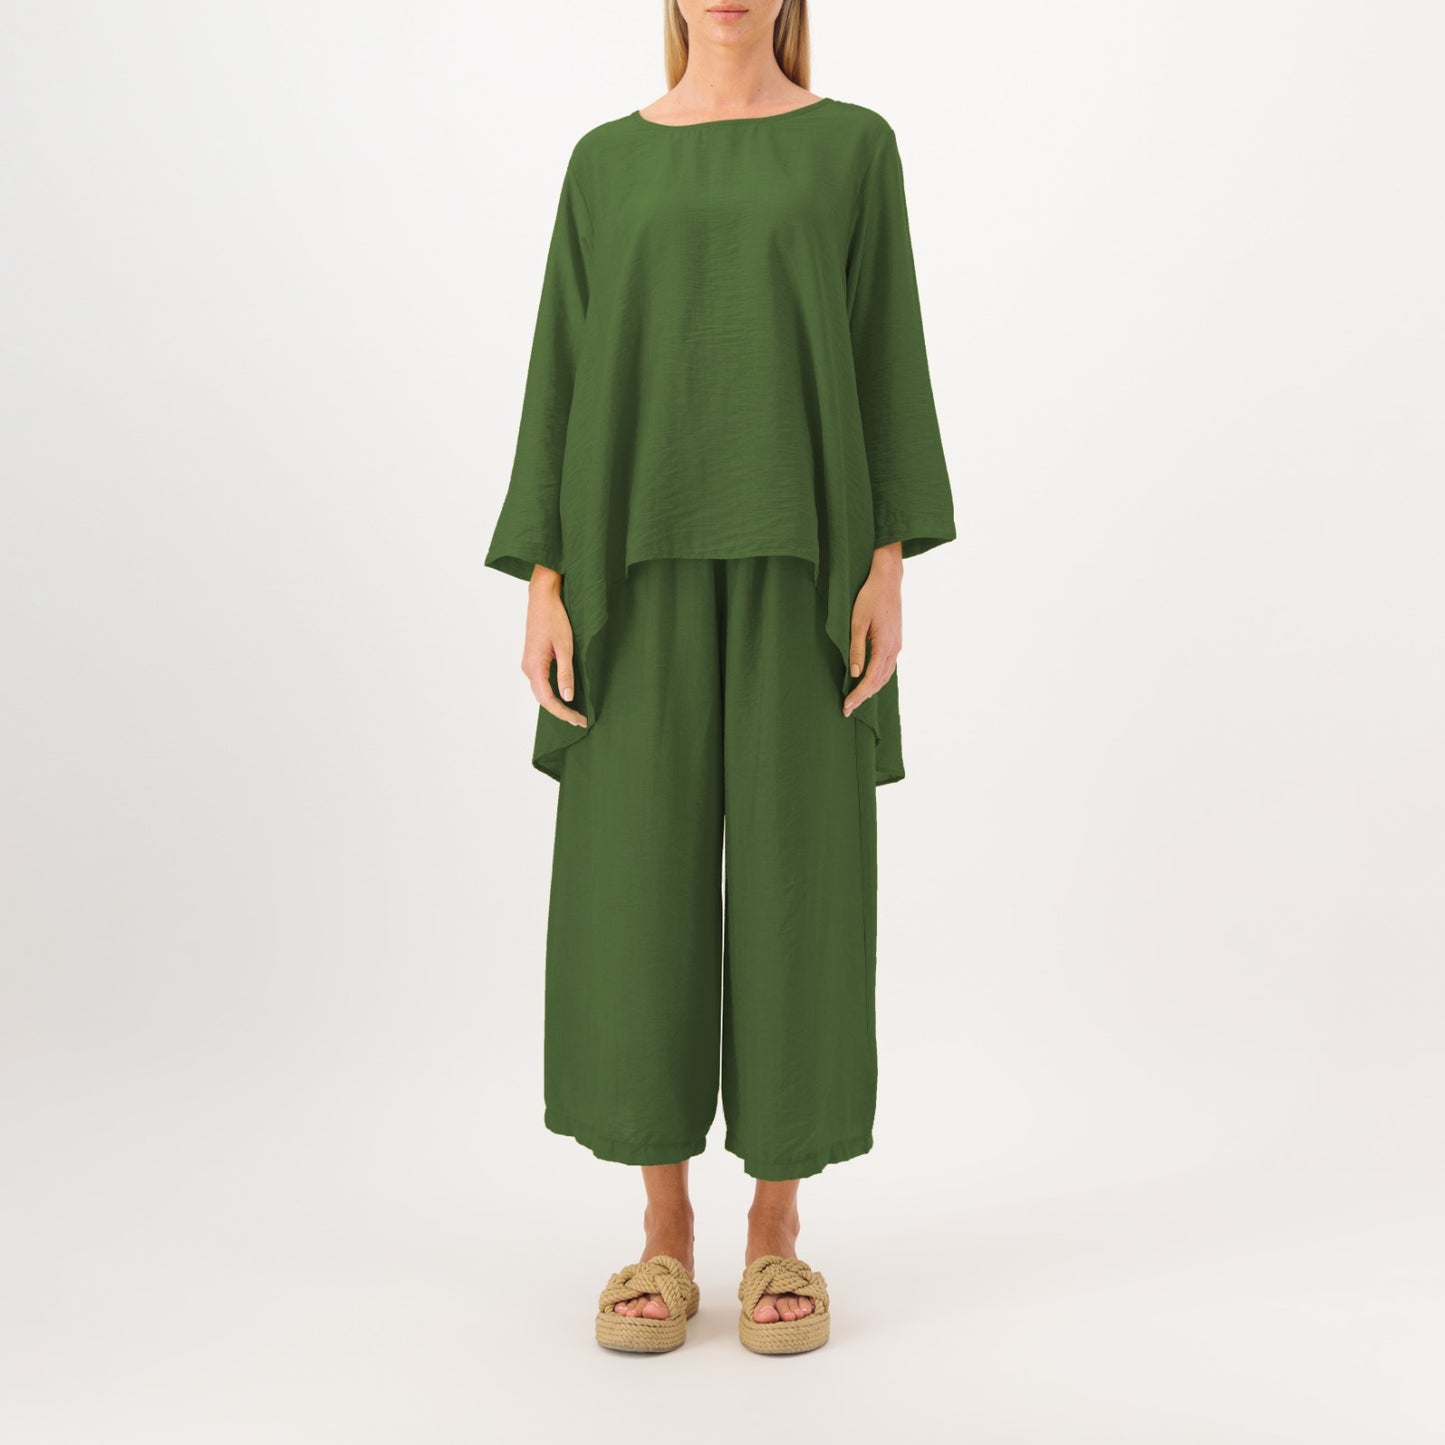 Jungle Green | All Day Closet Set of 2 - Comfortable style in attractive colors -arabian outfit - casual setcasual set - all day outfits - closet fashion store